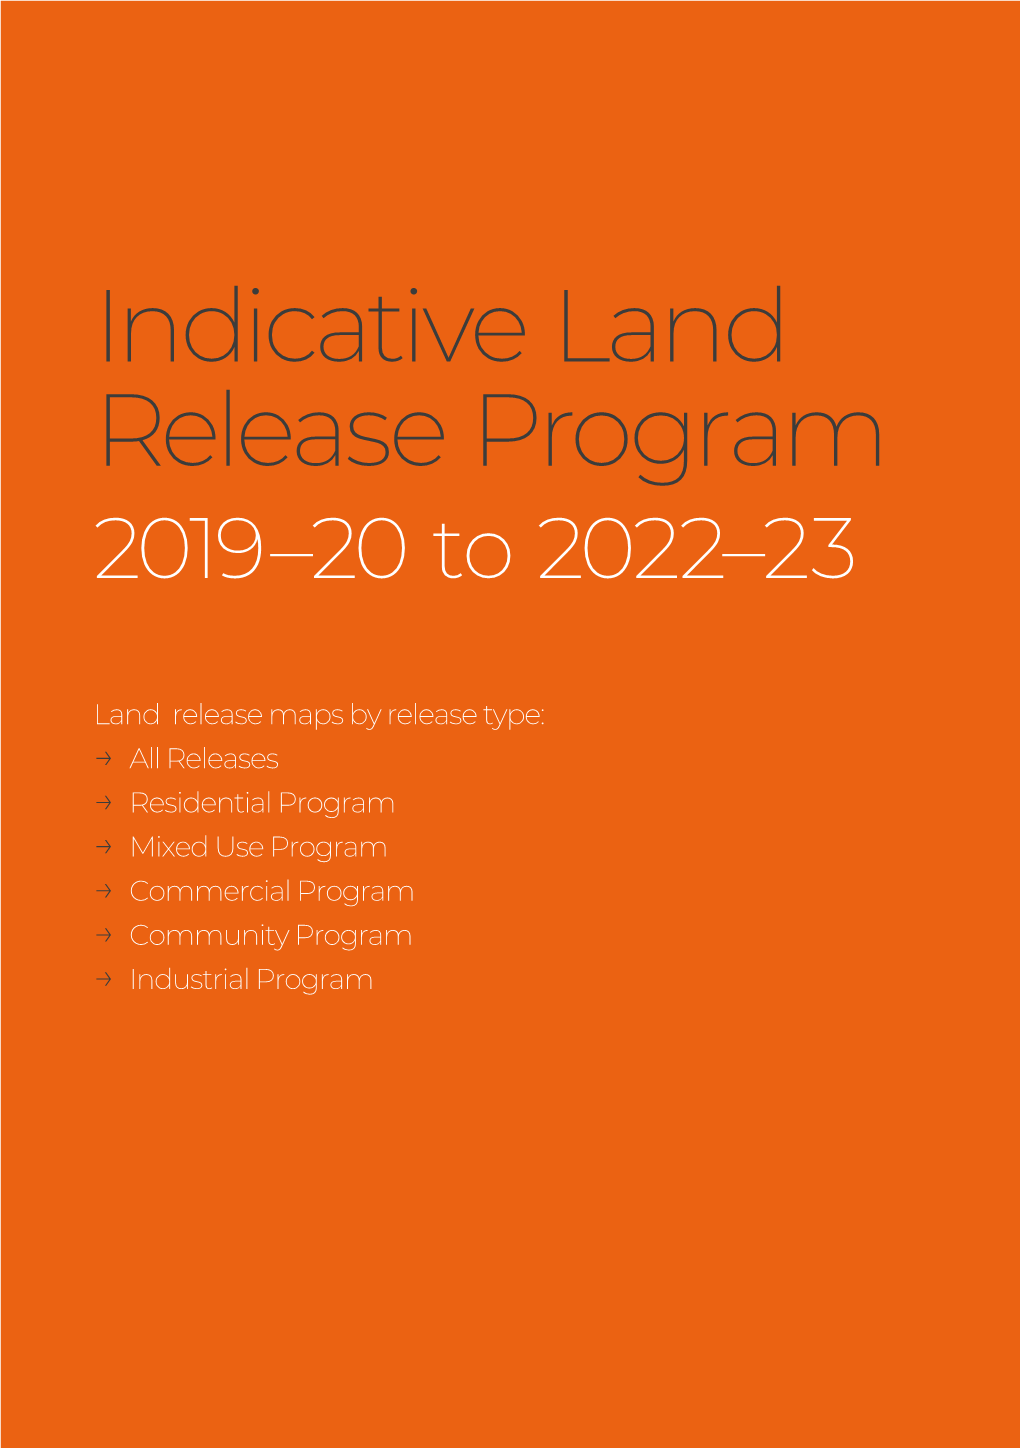 ACT Indicative Land Release Program 2019-20 to 2022-23